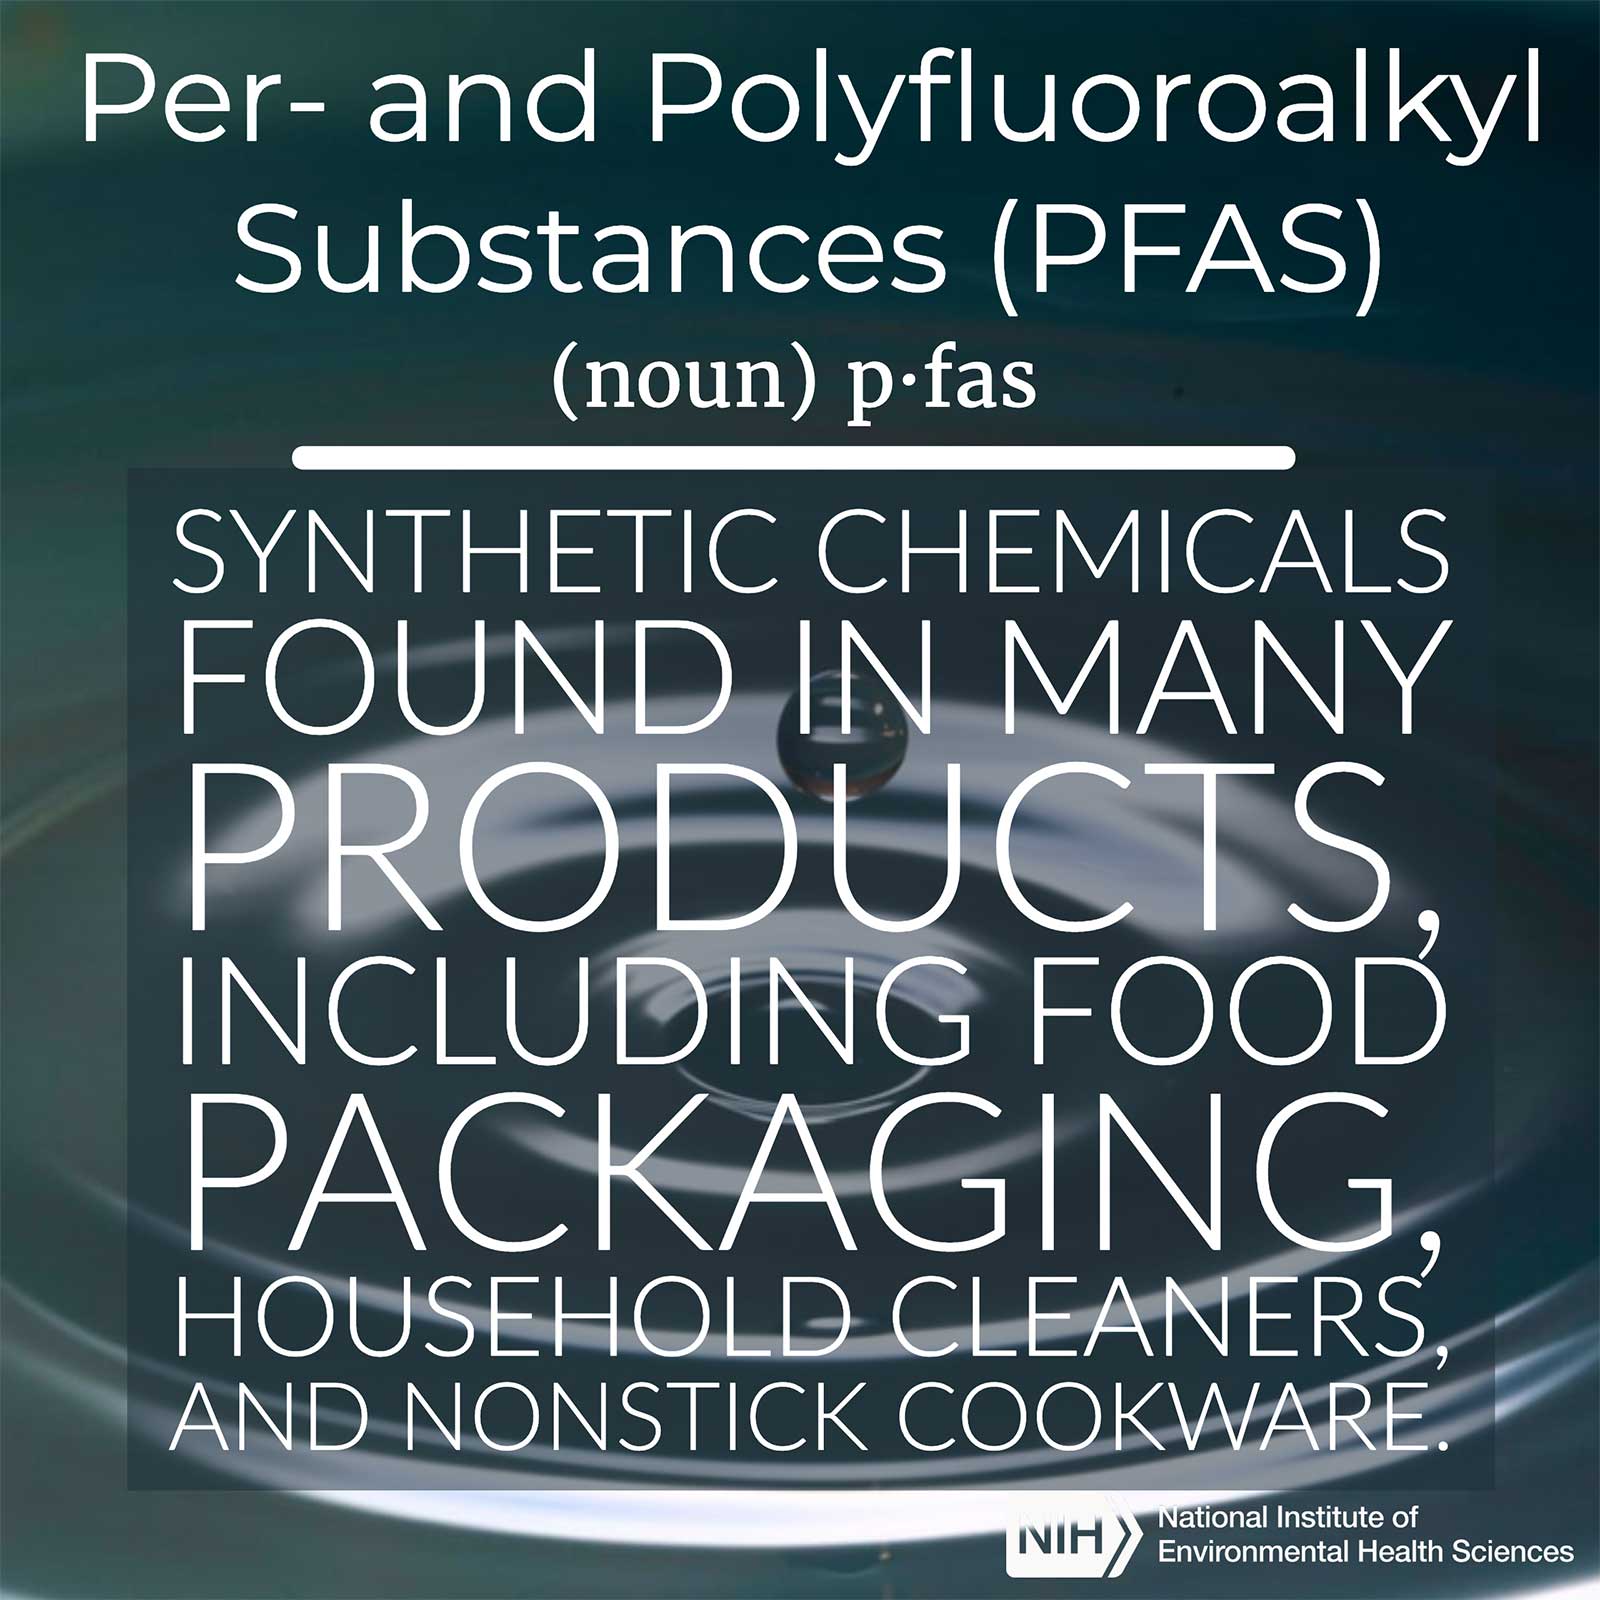 Per- and Polyfluoroalkyl Substances (PFAS) (noun) defined as 'synthetic chemicals found in many products, including food packaging, household cleaners and nonstick cookware.'